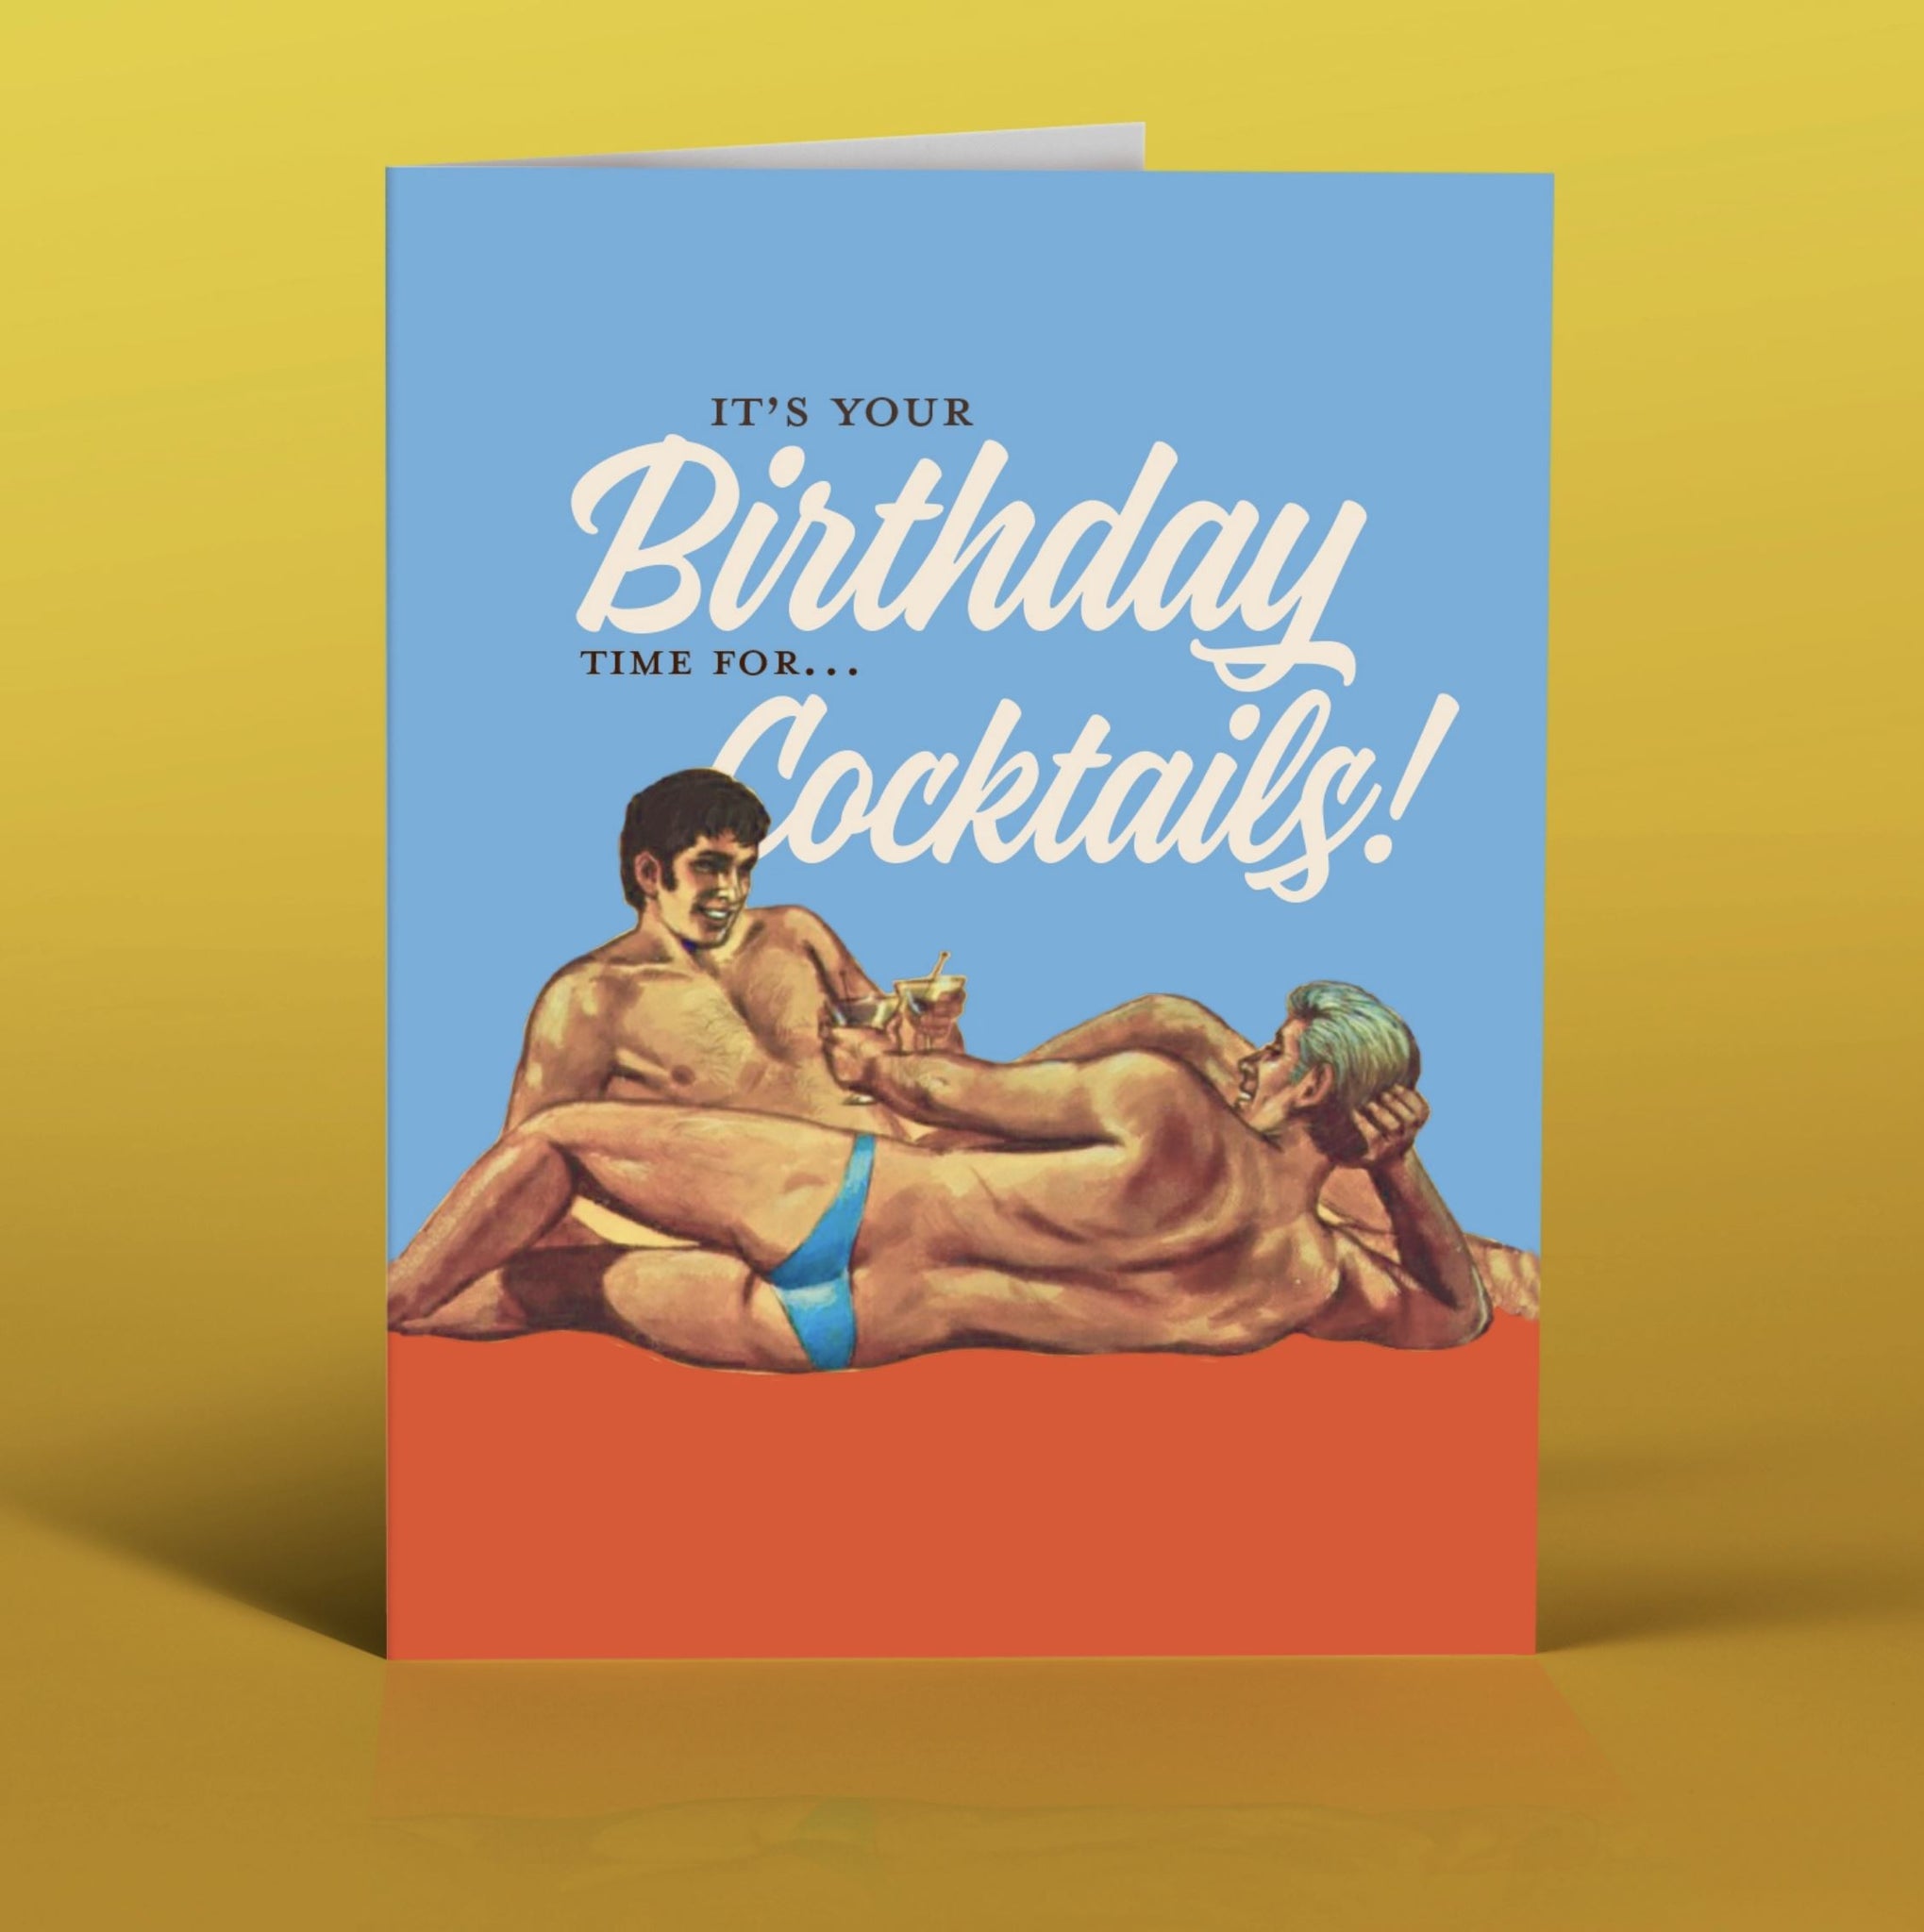 Offensive Delightful Cocktails Gay Greeting Card - Third Drawer Down